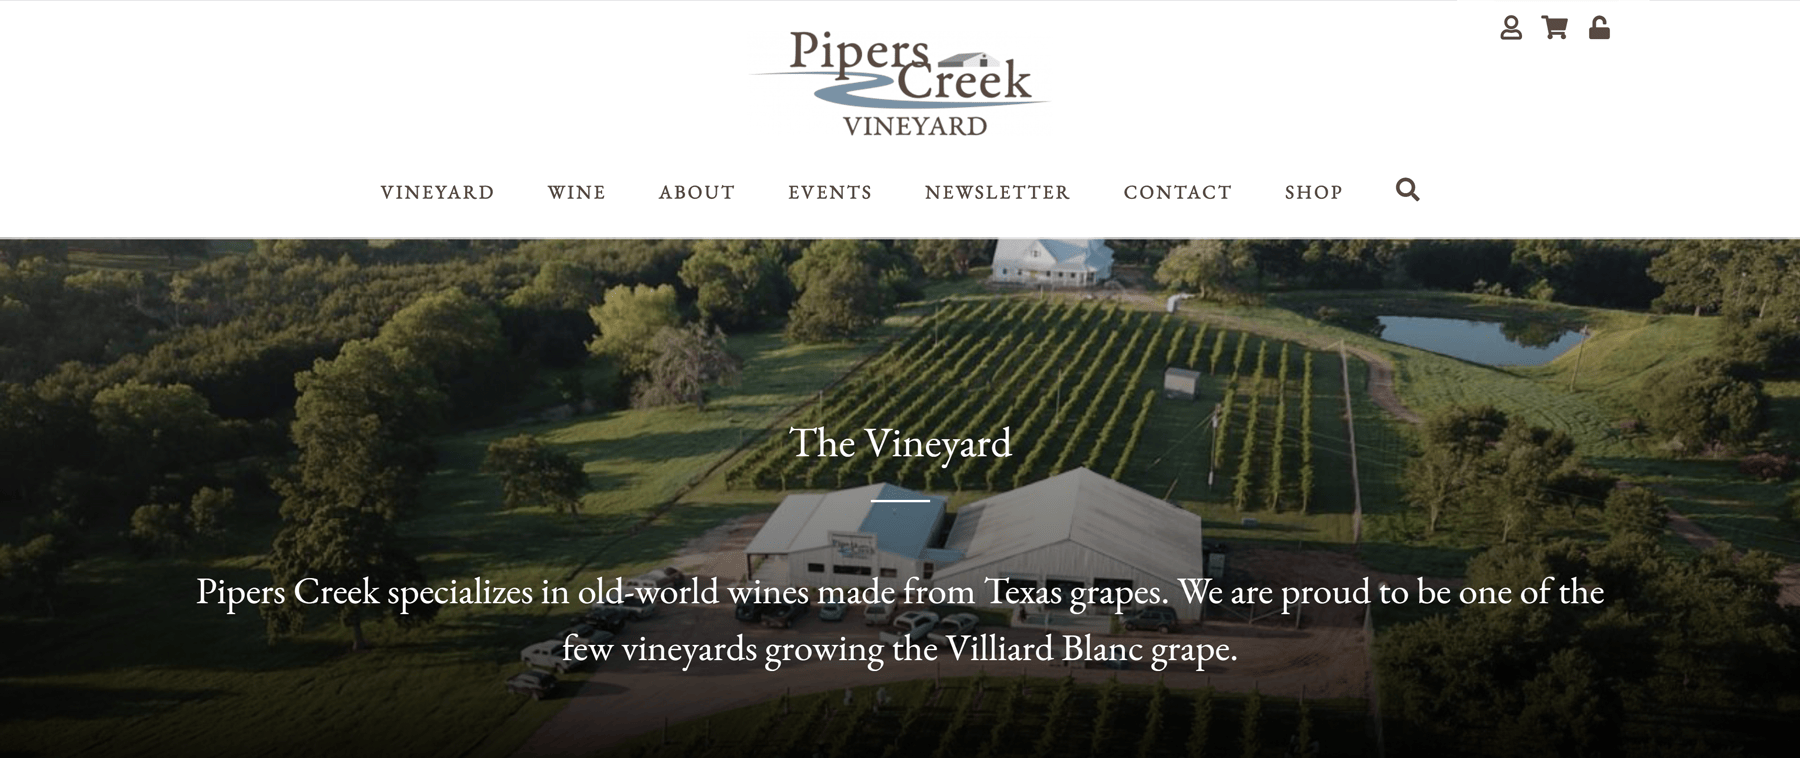 Pipers Creek Vineyard eCommerce Website Home Page